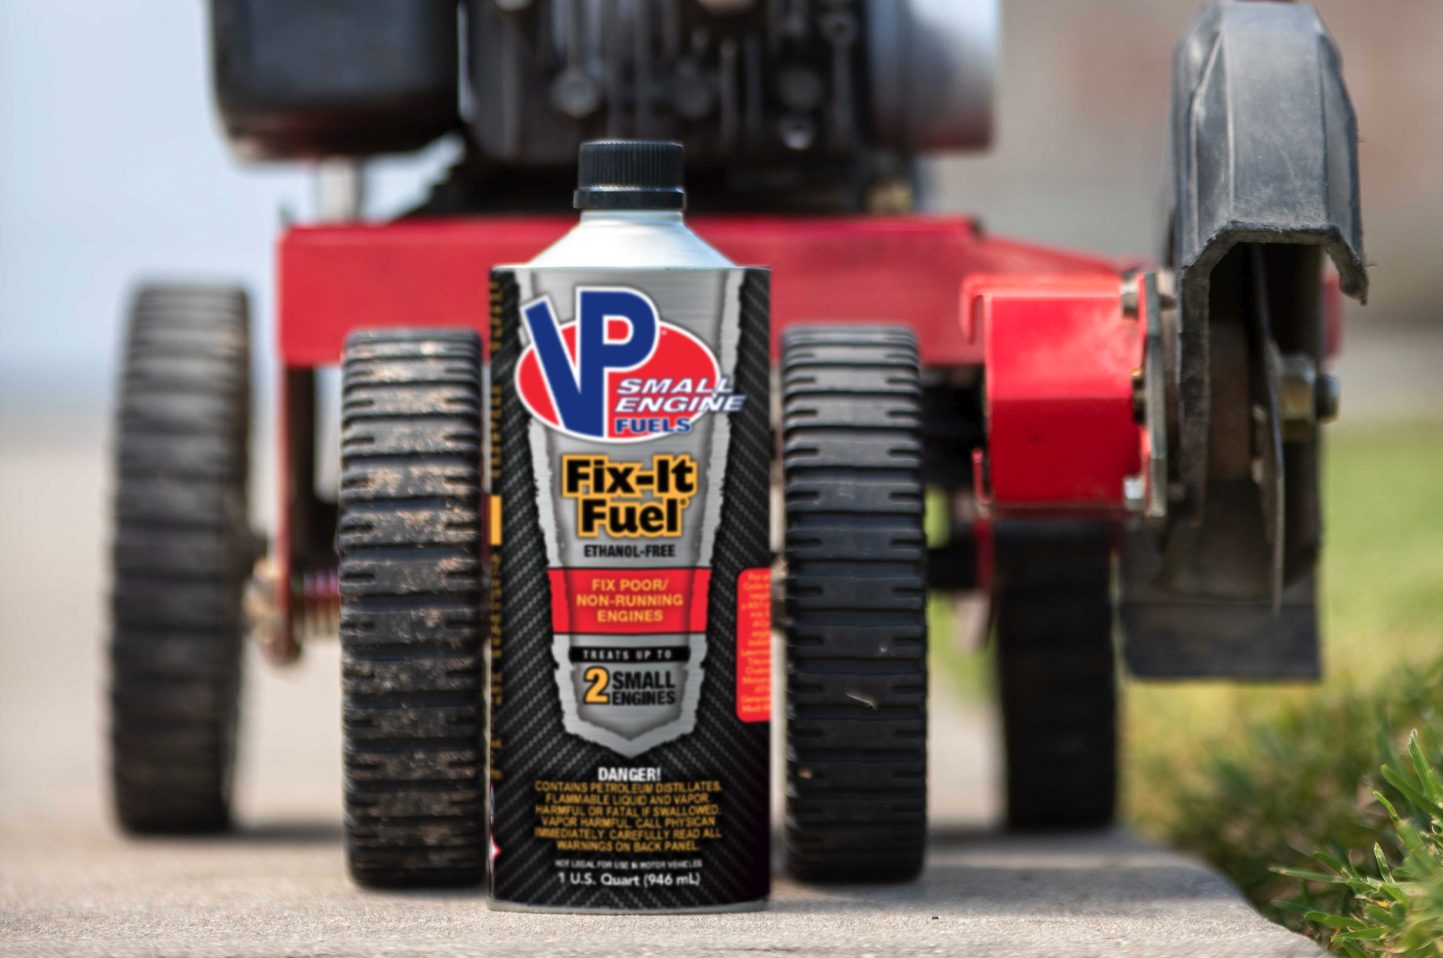 honda lawn mower won't start? VP Fix-It-Fuel is the easy way to repair a non-running mower. Works with any brand